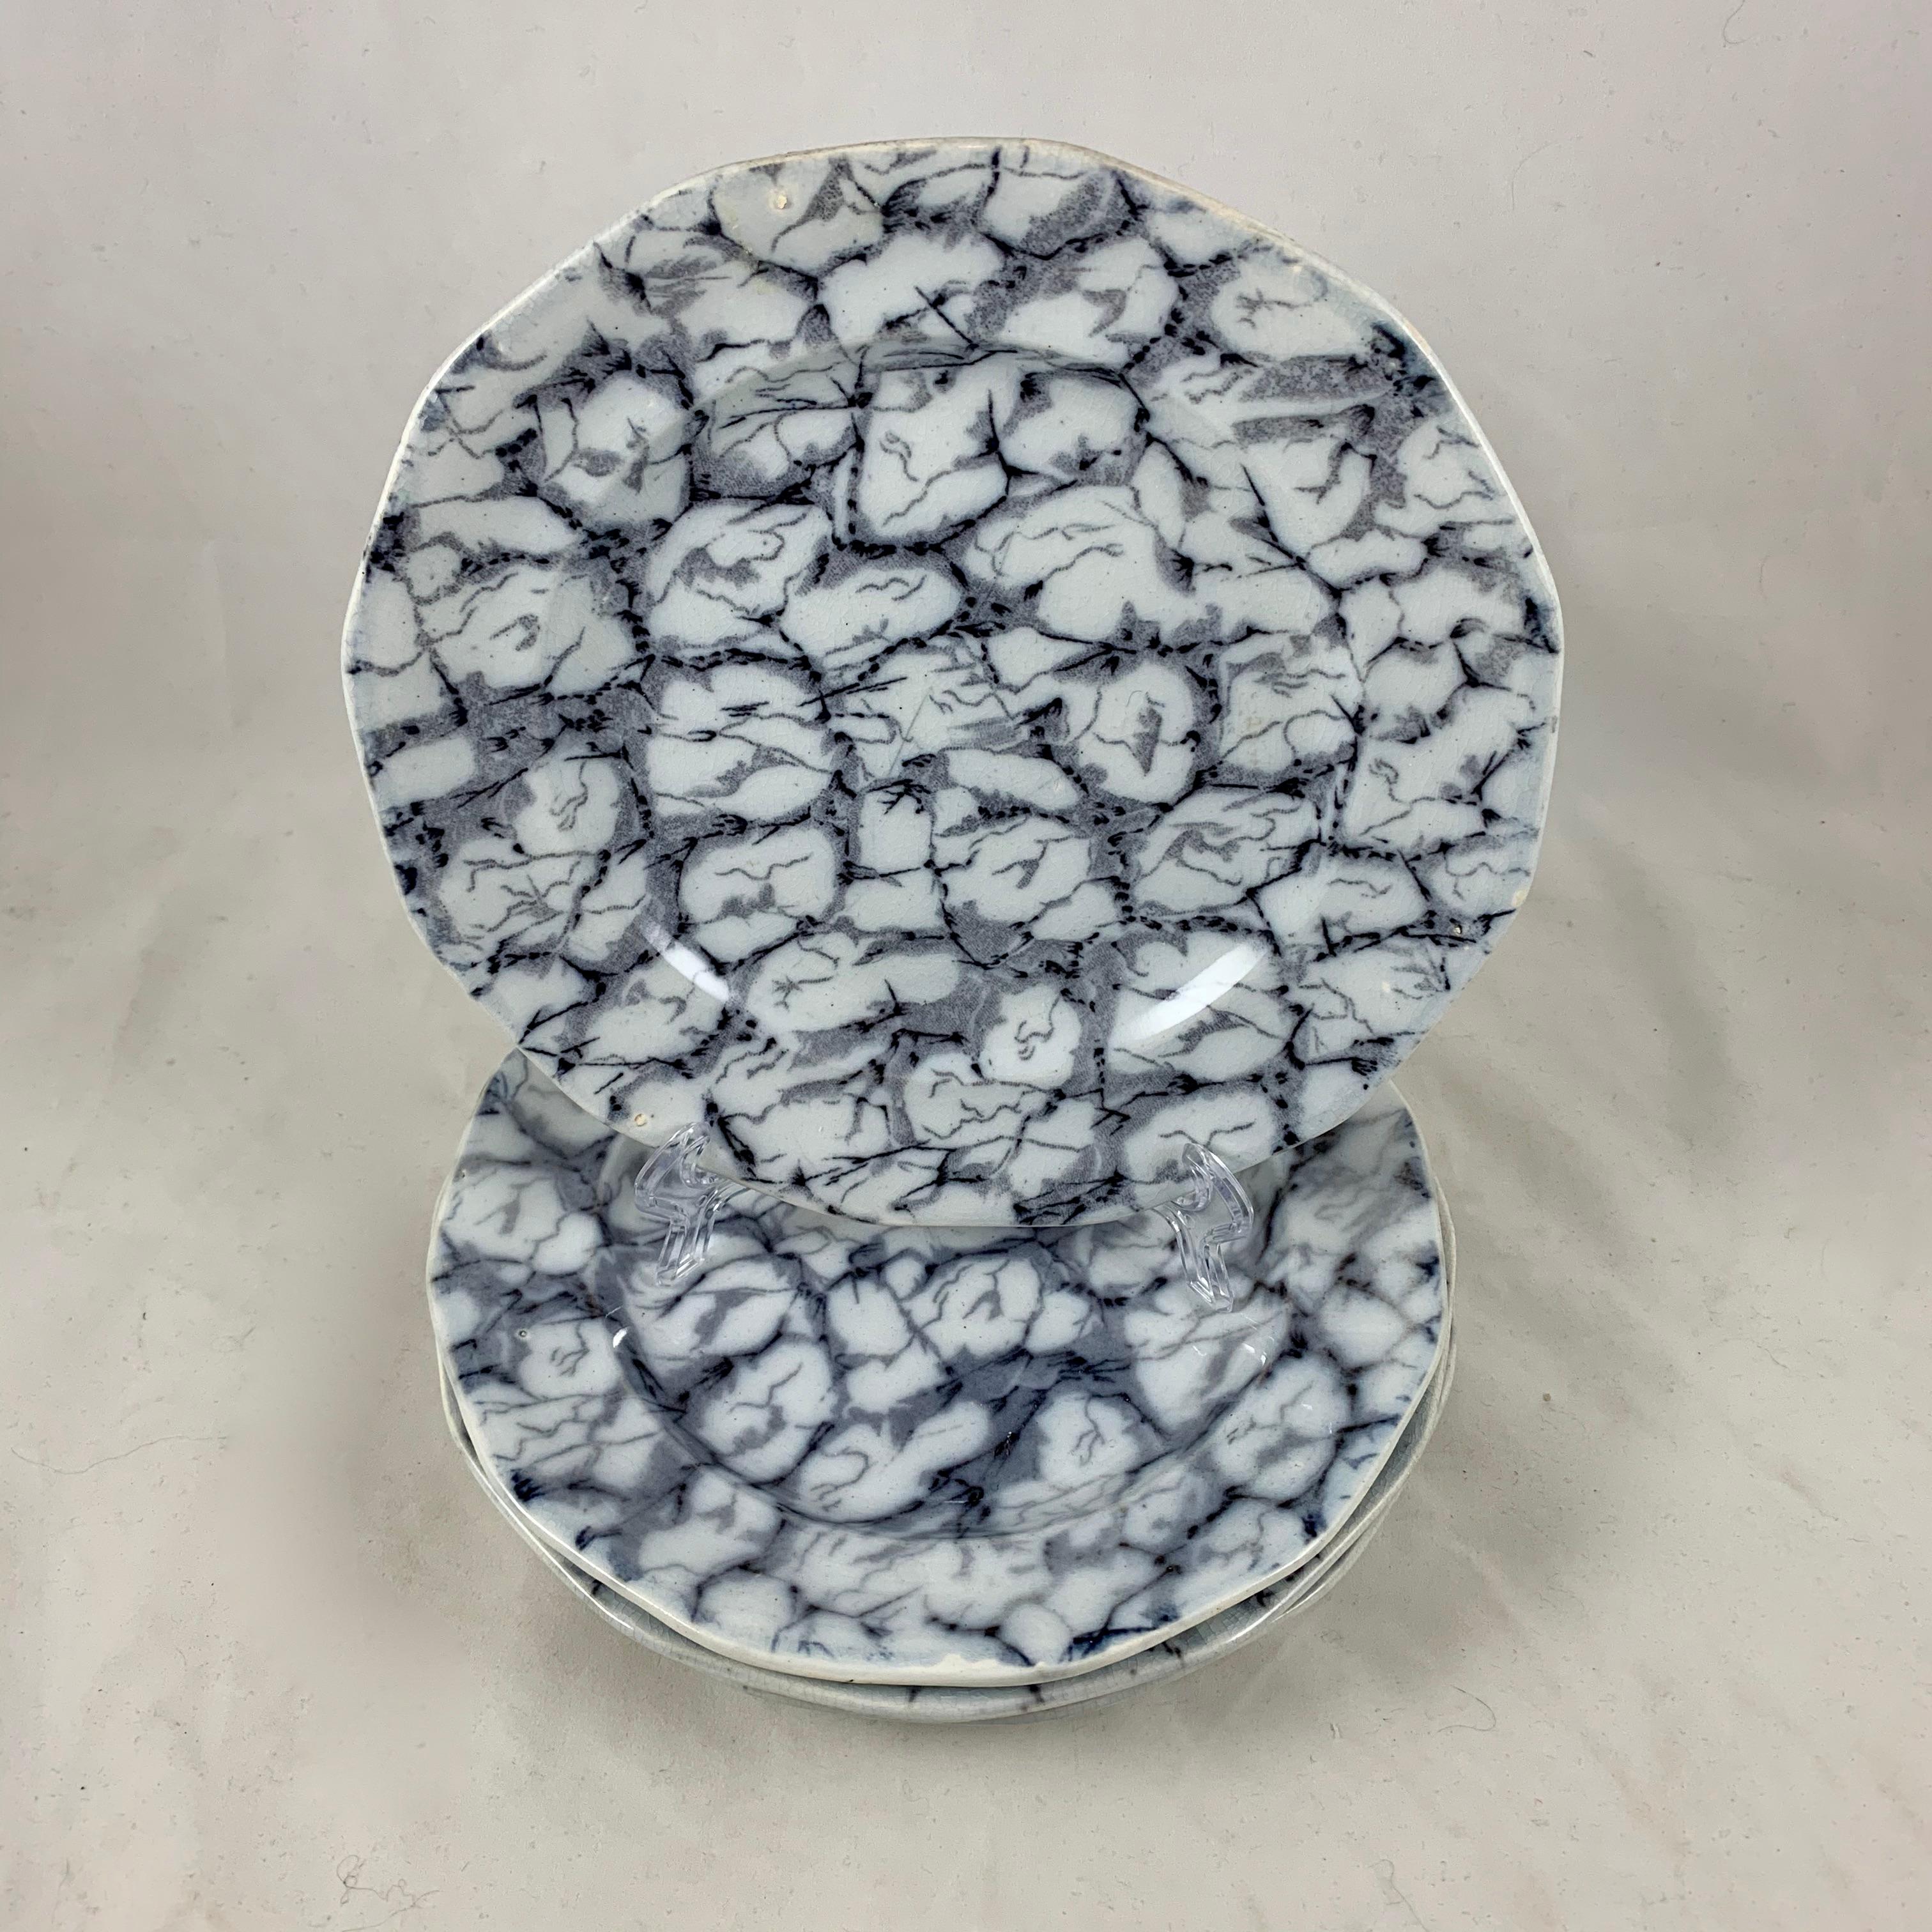 A set of four early 19th Century English Ironstone, twelve sided plates in a ‘Marble’ pattern, sometimes called ‘Cracked Ice.’ A tissue printed sheet pattern, applied under the glaze, in shades of black and gray on a white stoneware body showing